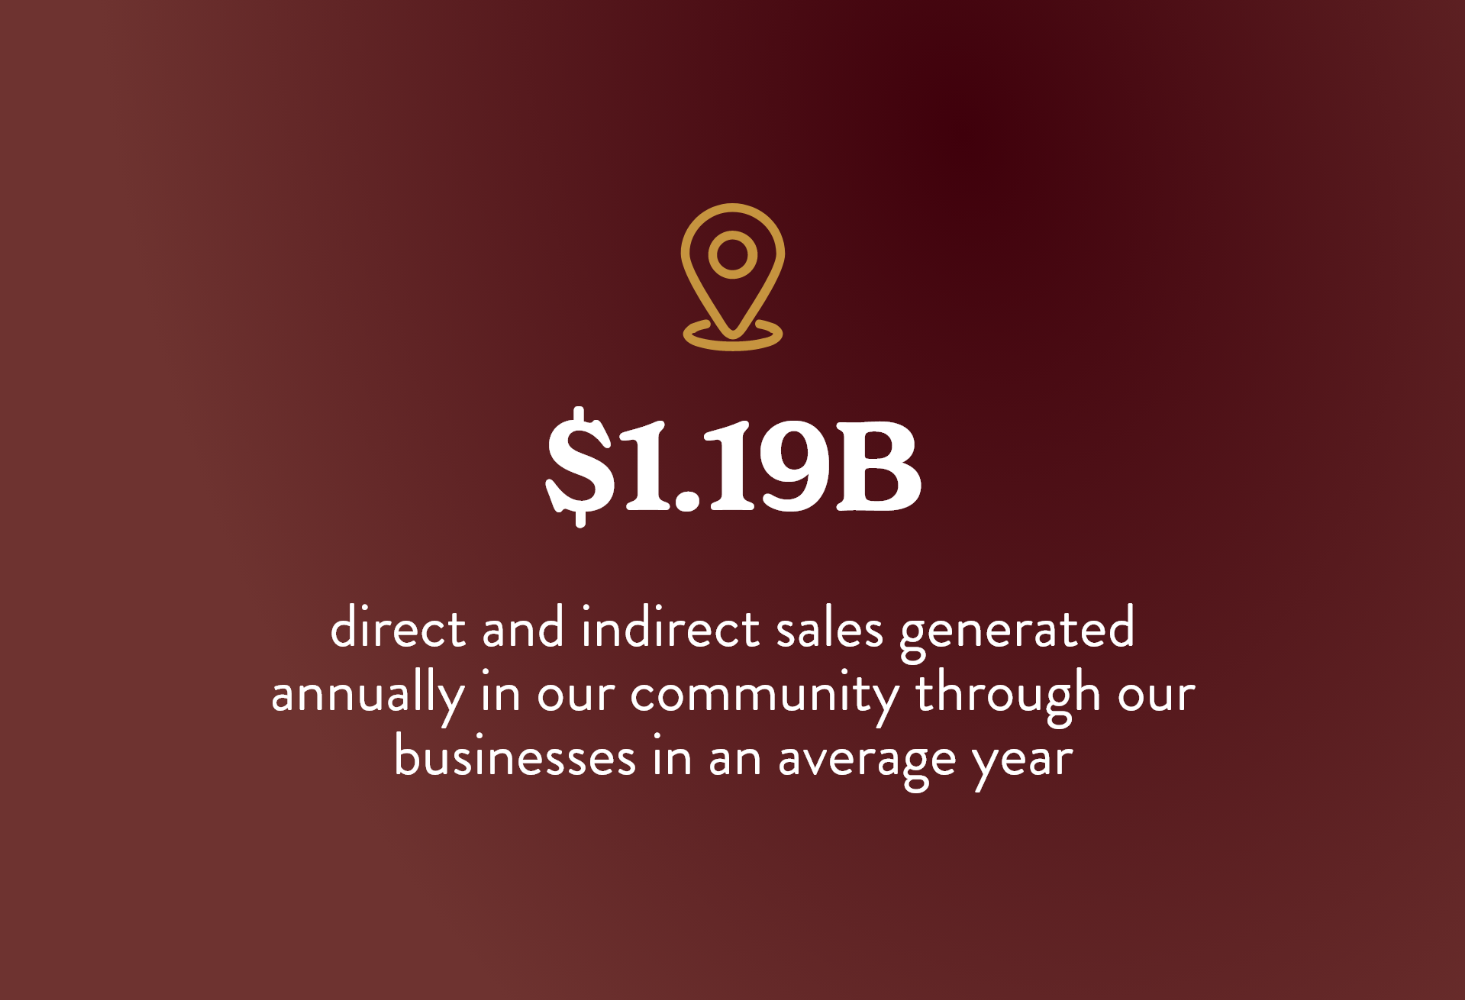 1.19B direct and indirect sales annually in our community through our businesses in an average year